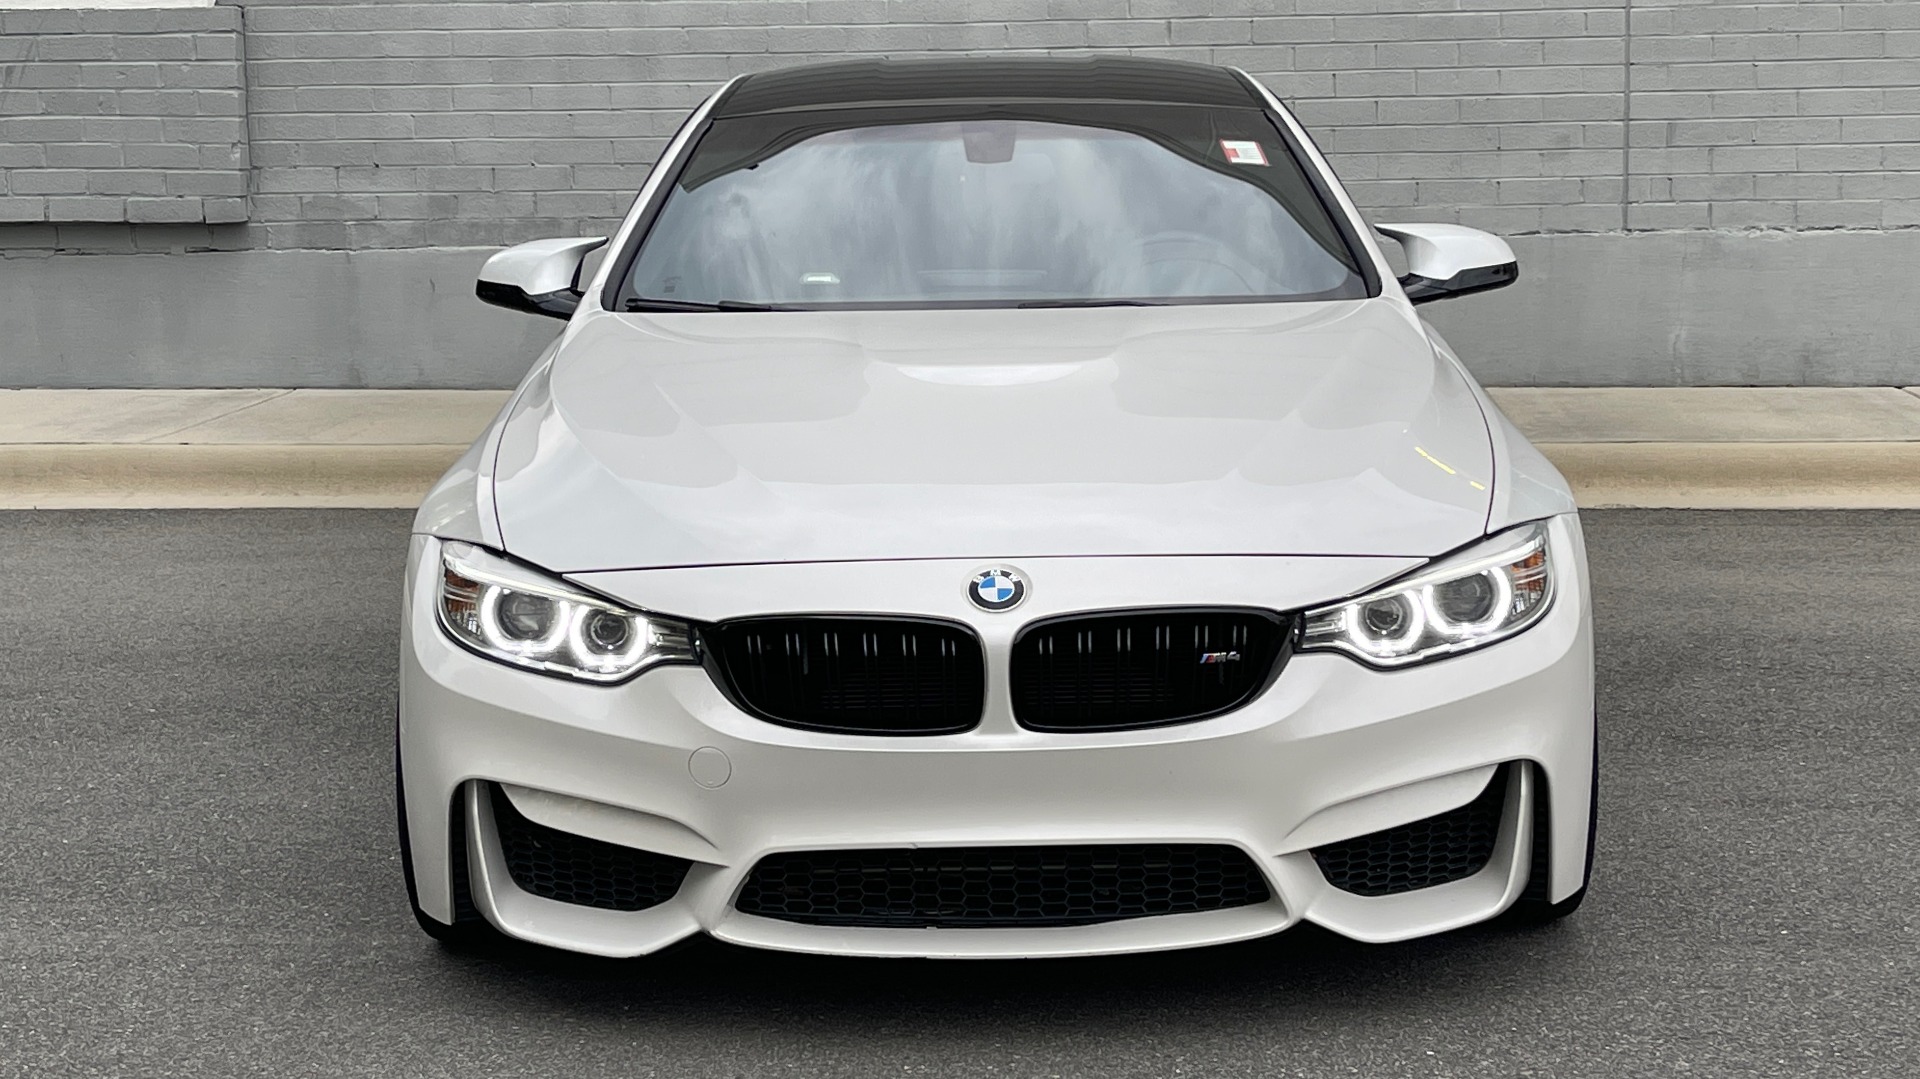 Used 2015 BMW M4 COUPE / 3.0L TURBO 425HP / 7-SPD AUTO / NAV / 19IN WHLS for sale Sold at Formula Imports in Charlotte NC 28227 9